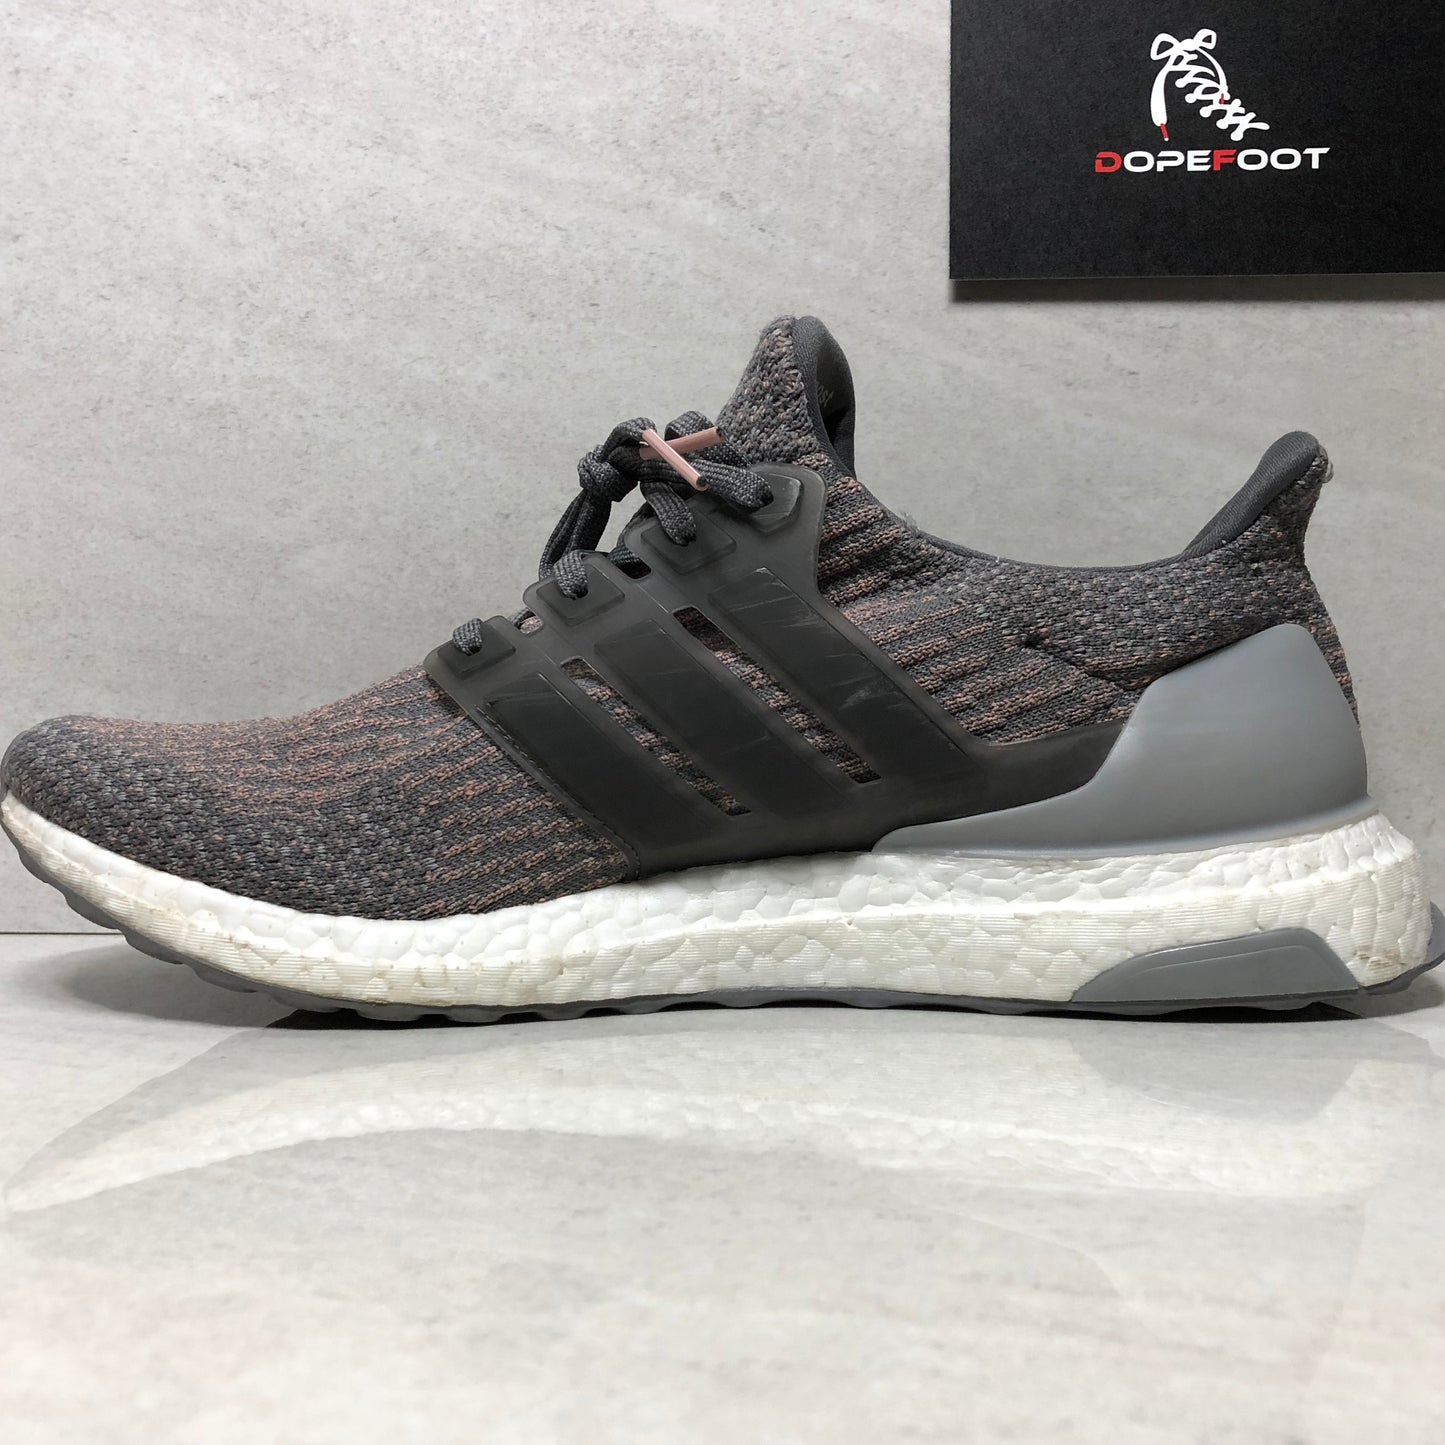 Adidas Men's Ultraboost Size 11 Grey Four/Grey Four/Trace Pink s82022